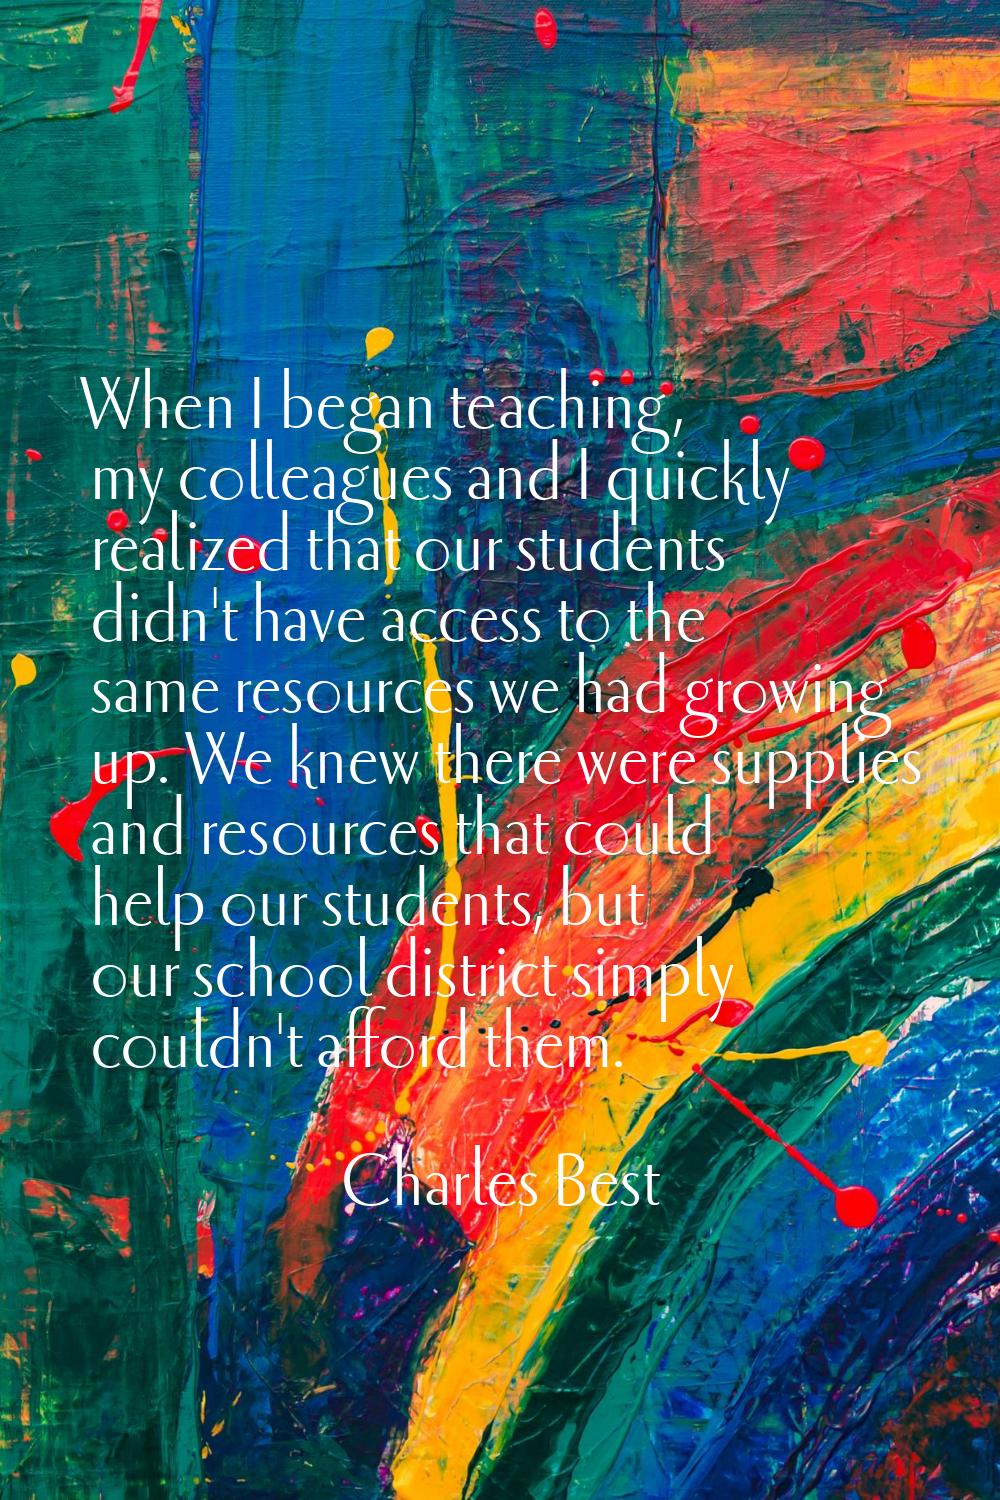 When I began teaching, my colleagues and I quickly realized that our students didn't have access to